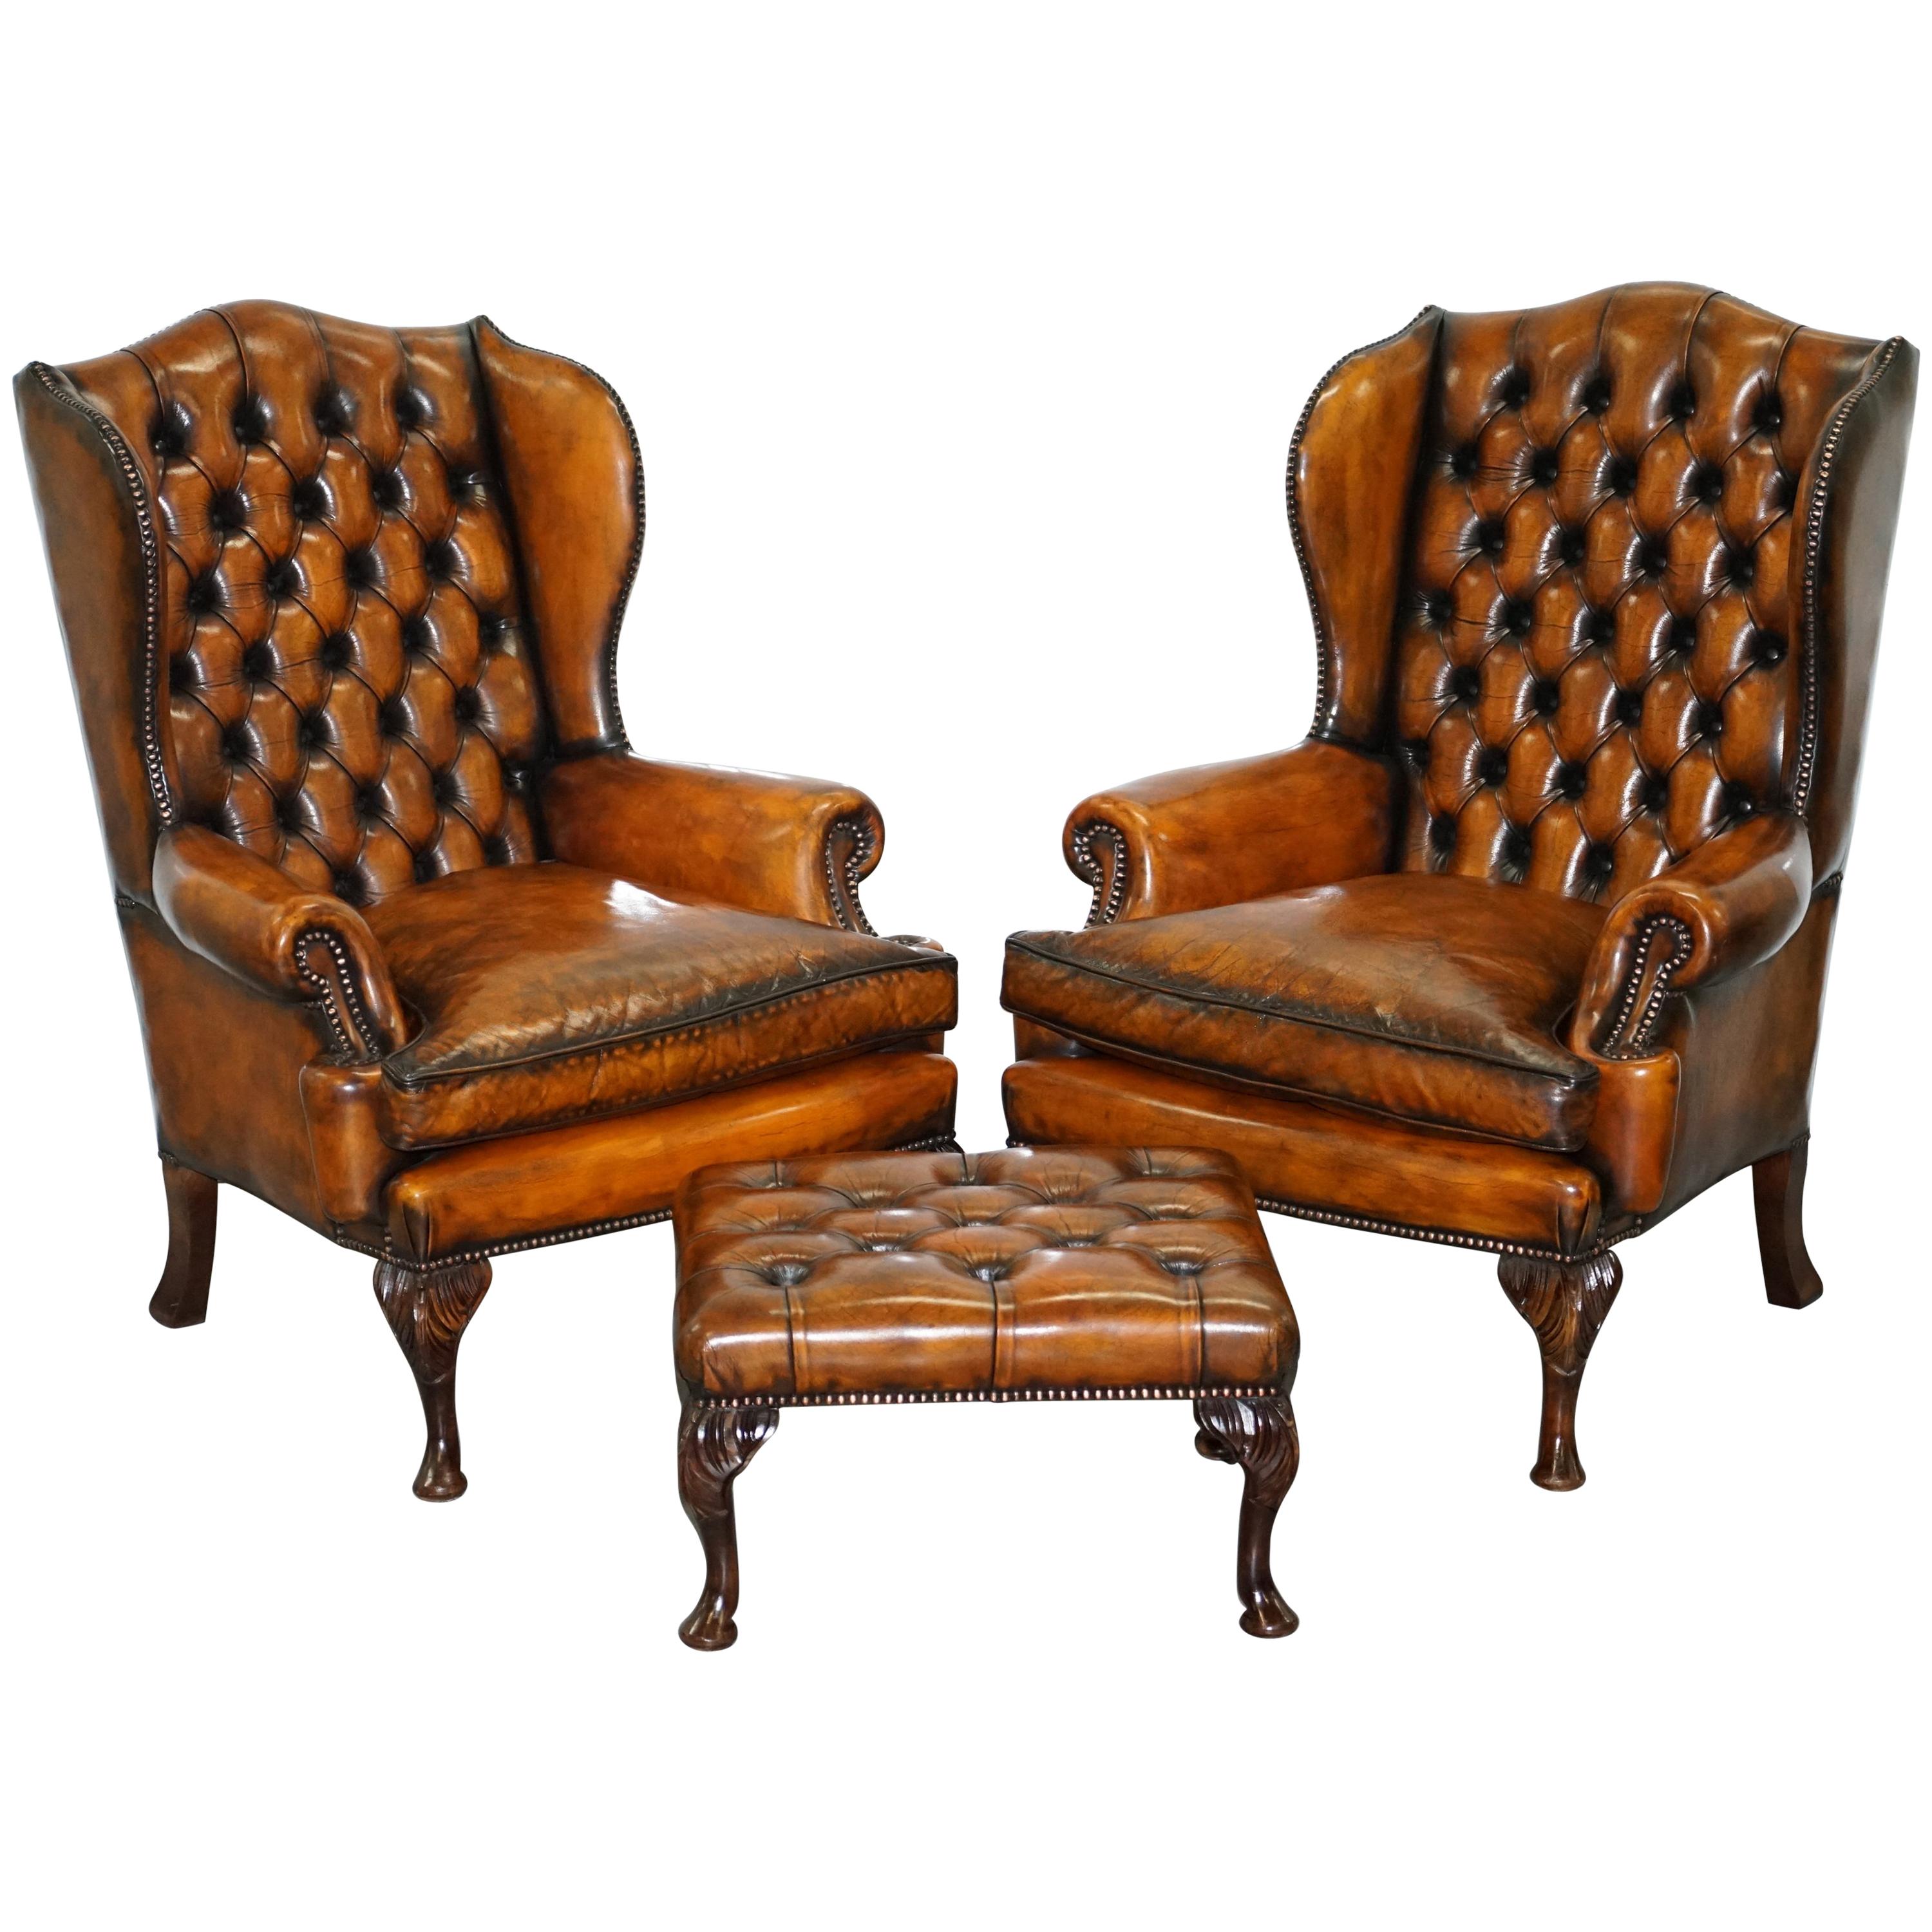 Pair of William Morris Chesterfield Victorian Wingback Armchairs Brown Leather